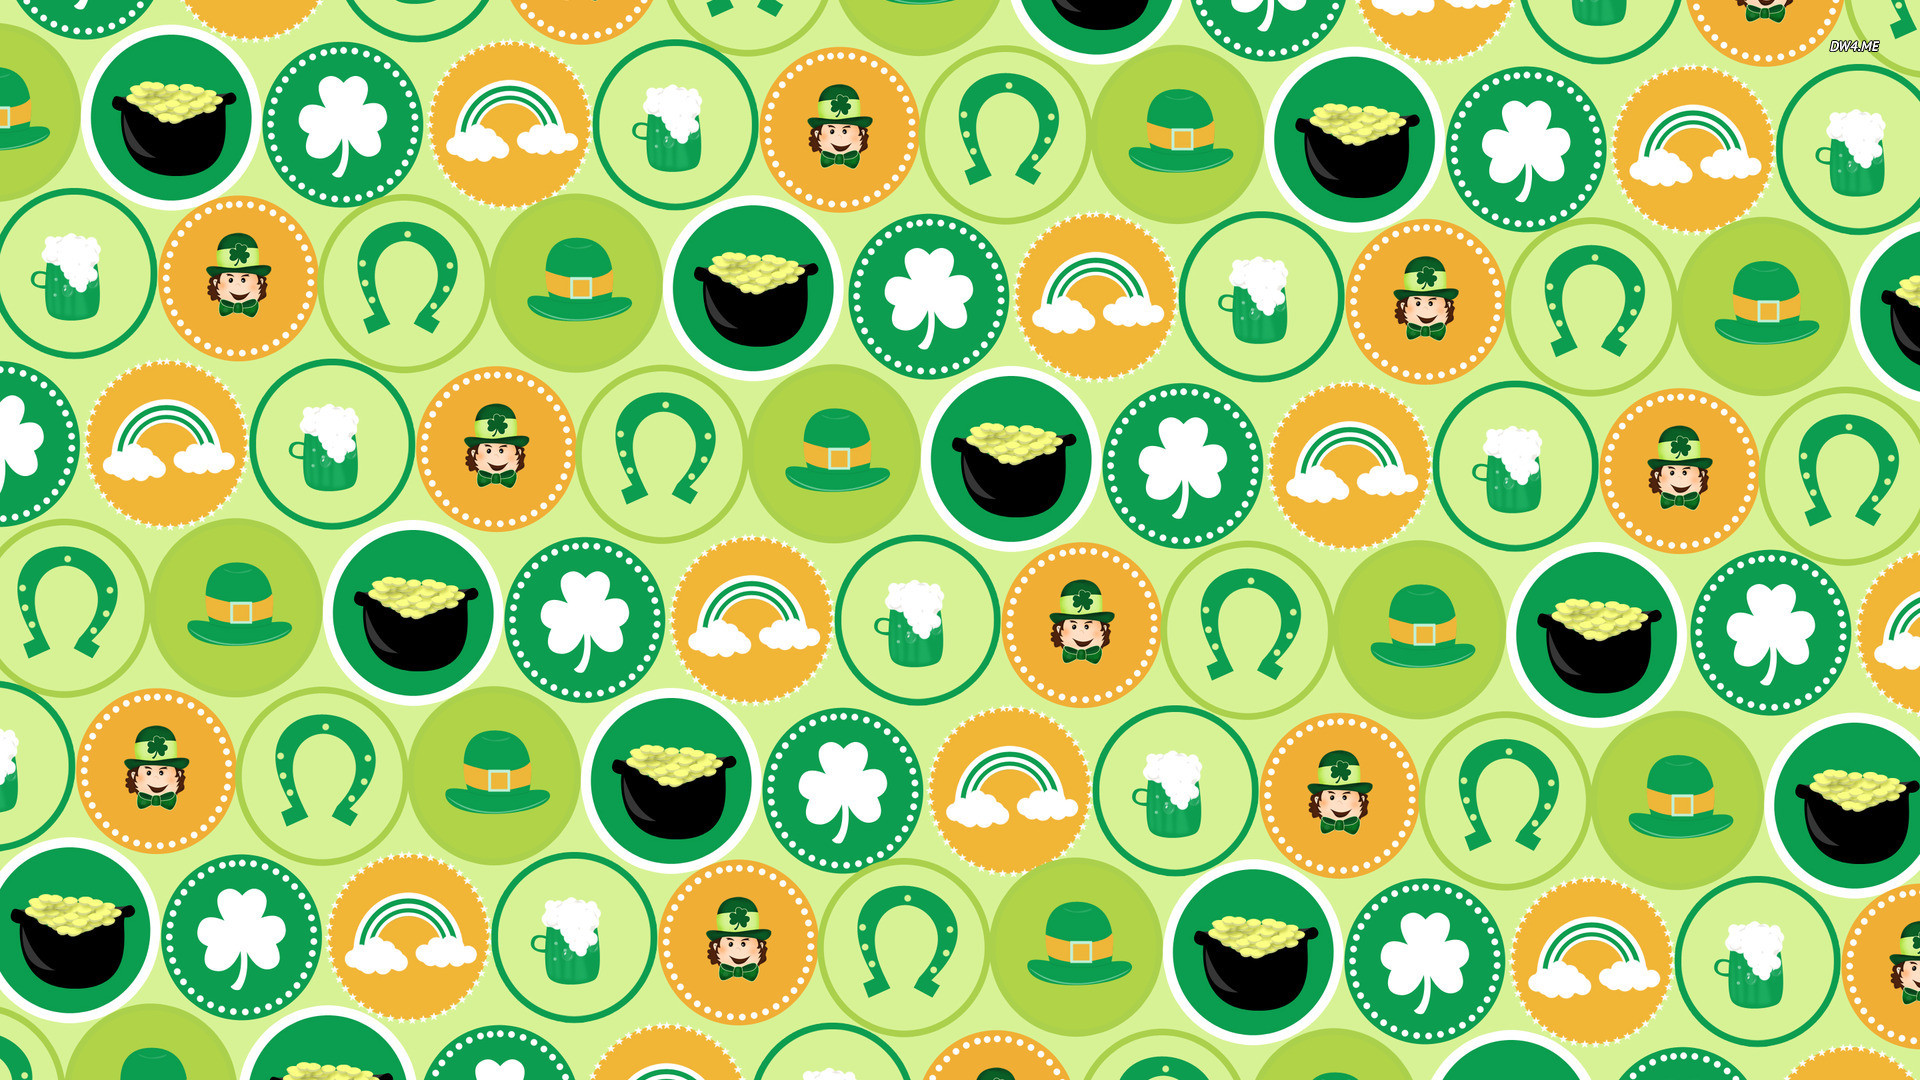 The 25 best St patricks day wallpaper ideas on Pinterest St patricks day facts, St patricks day sayings and March crafts